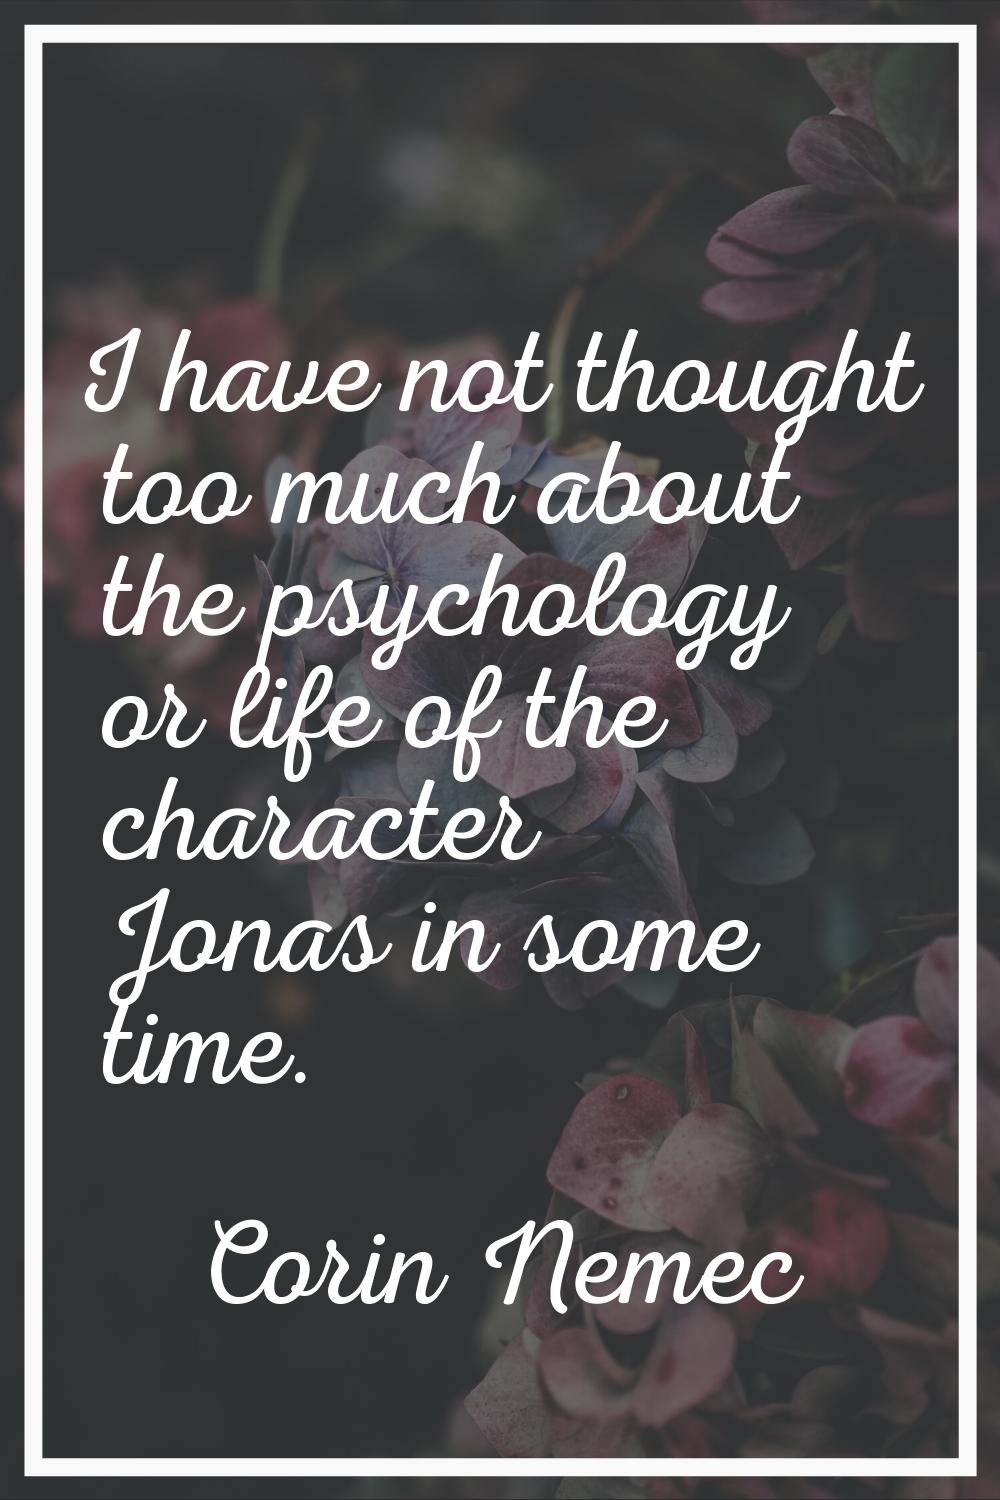 I have not thought too much about the psychology or life of the character Jonas in some time.